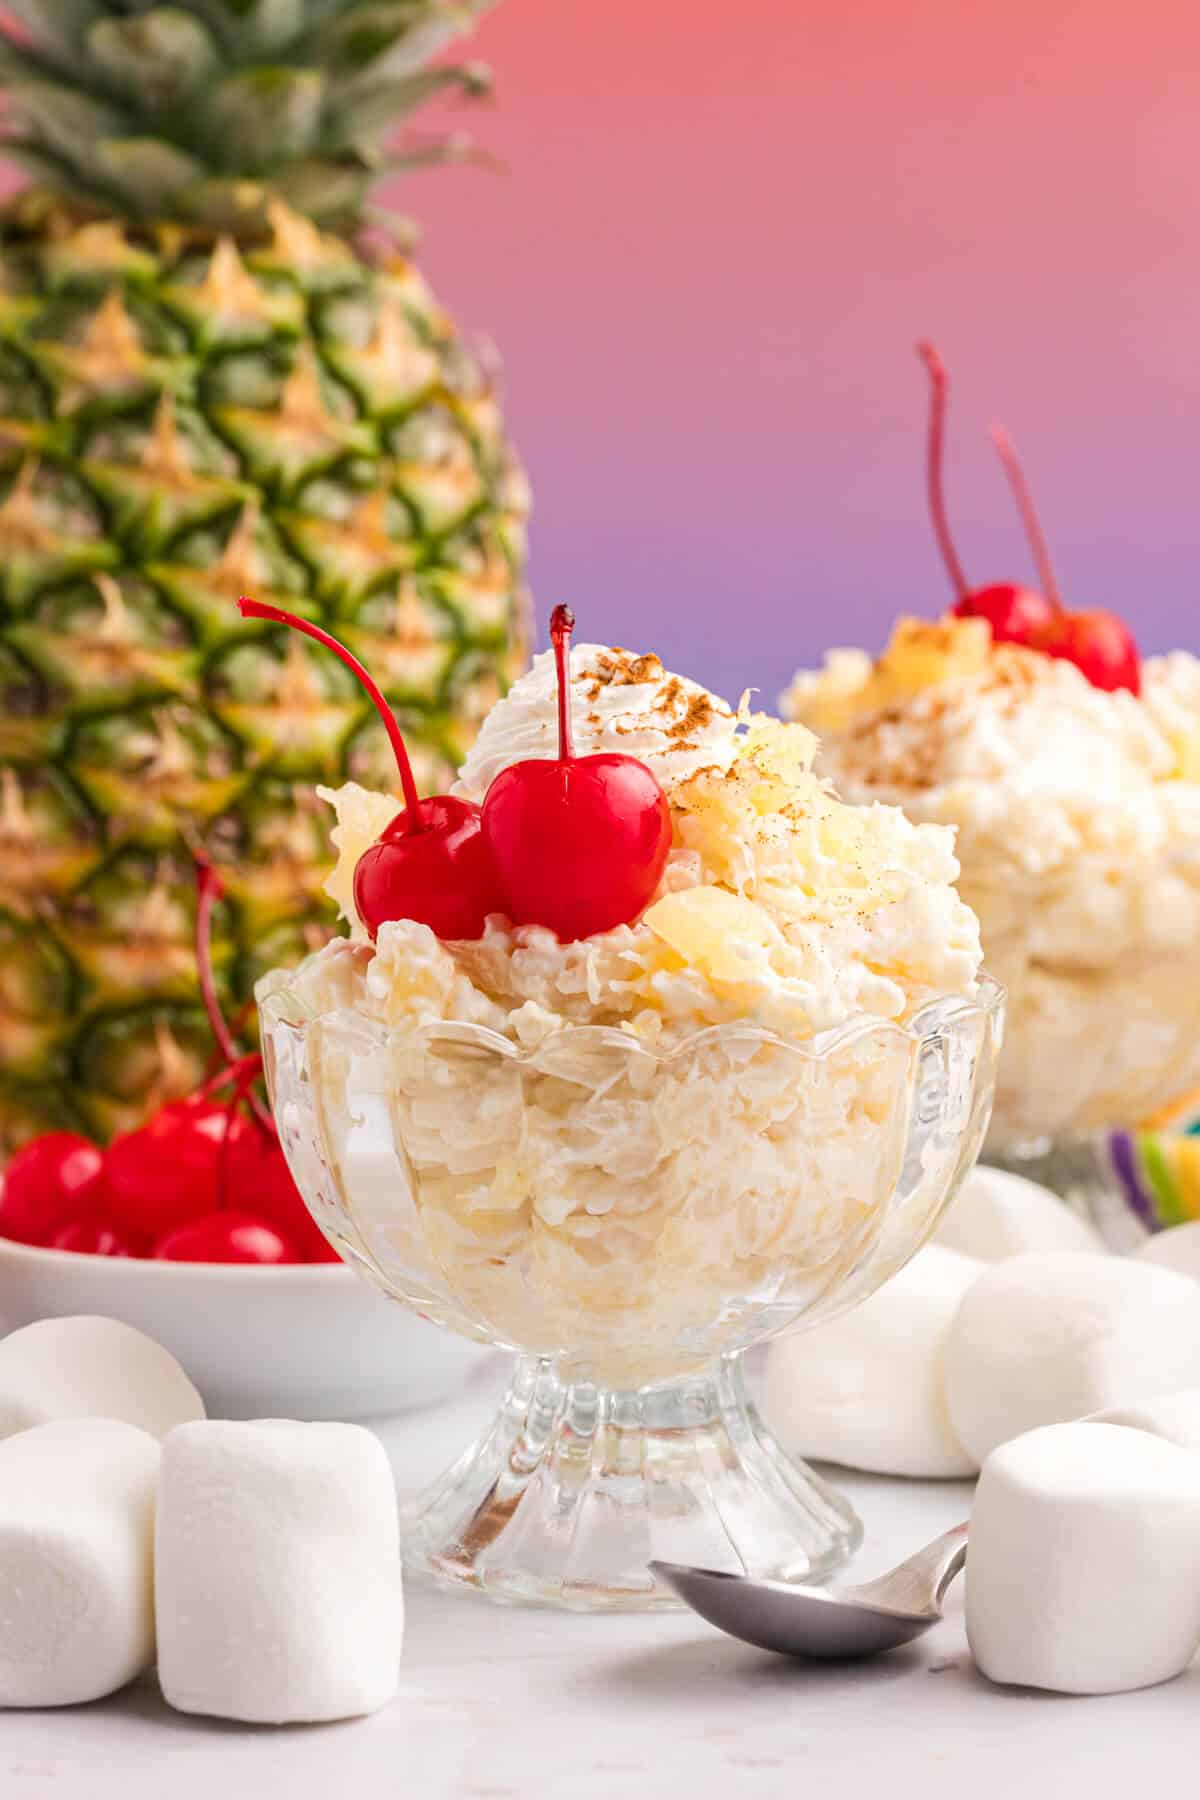 Pineapple Rice Pudding in a parfait dish.